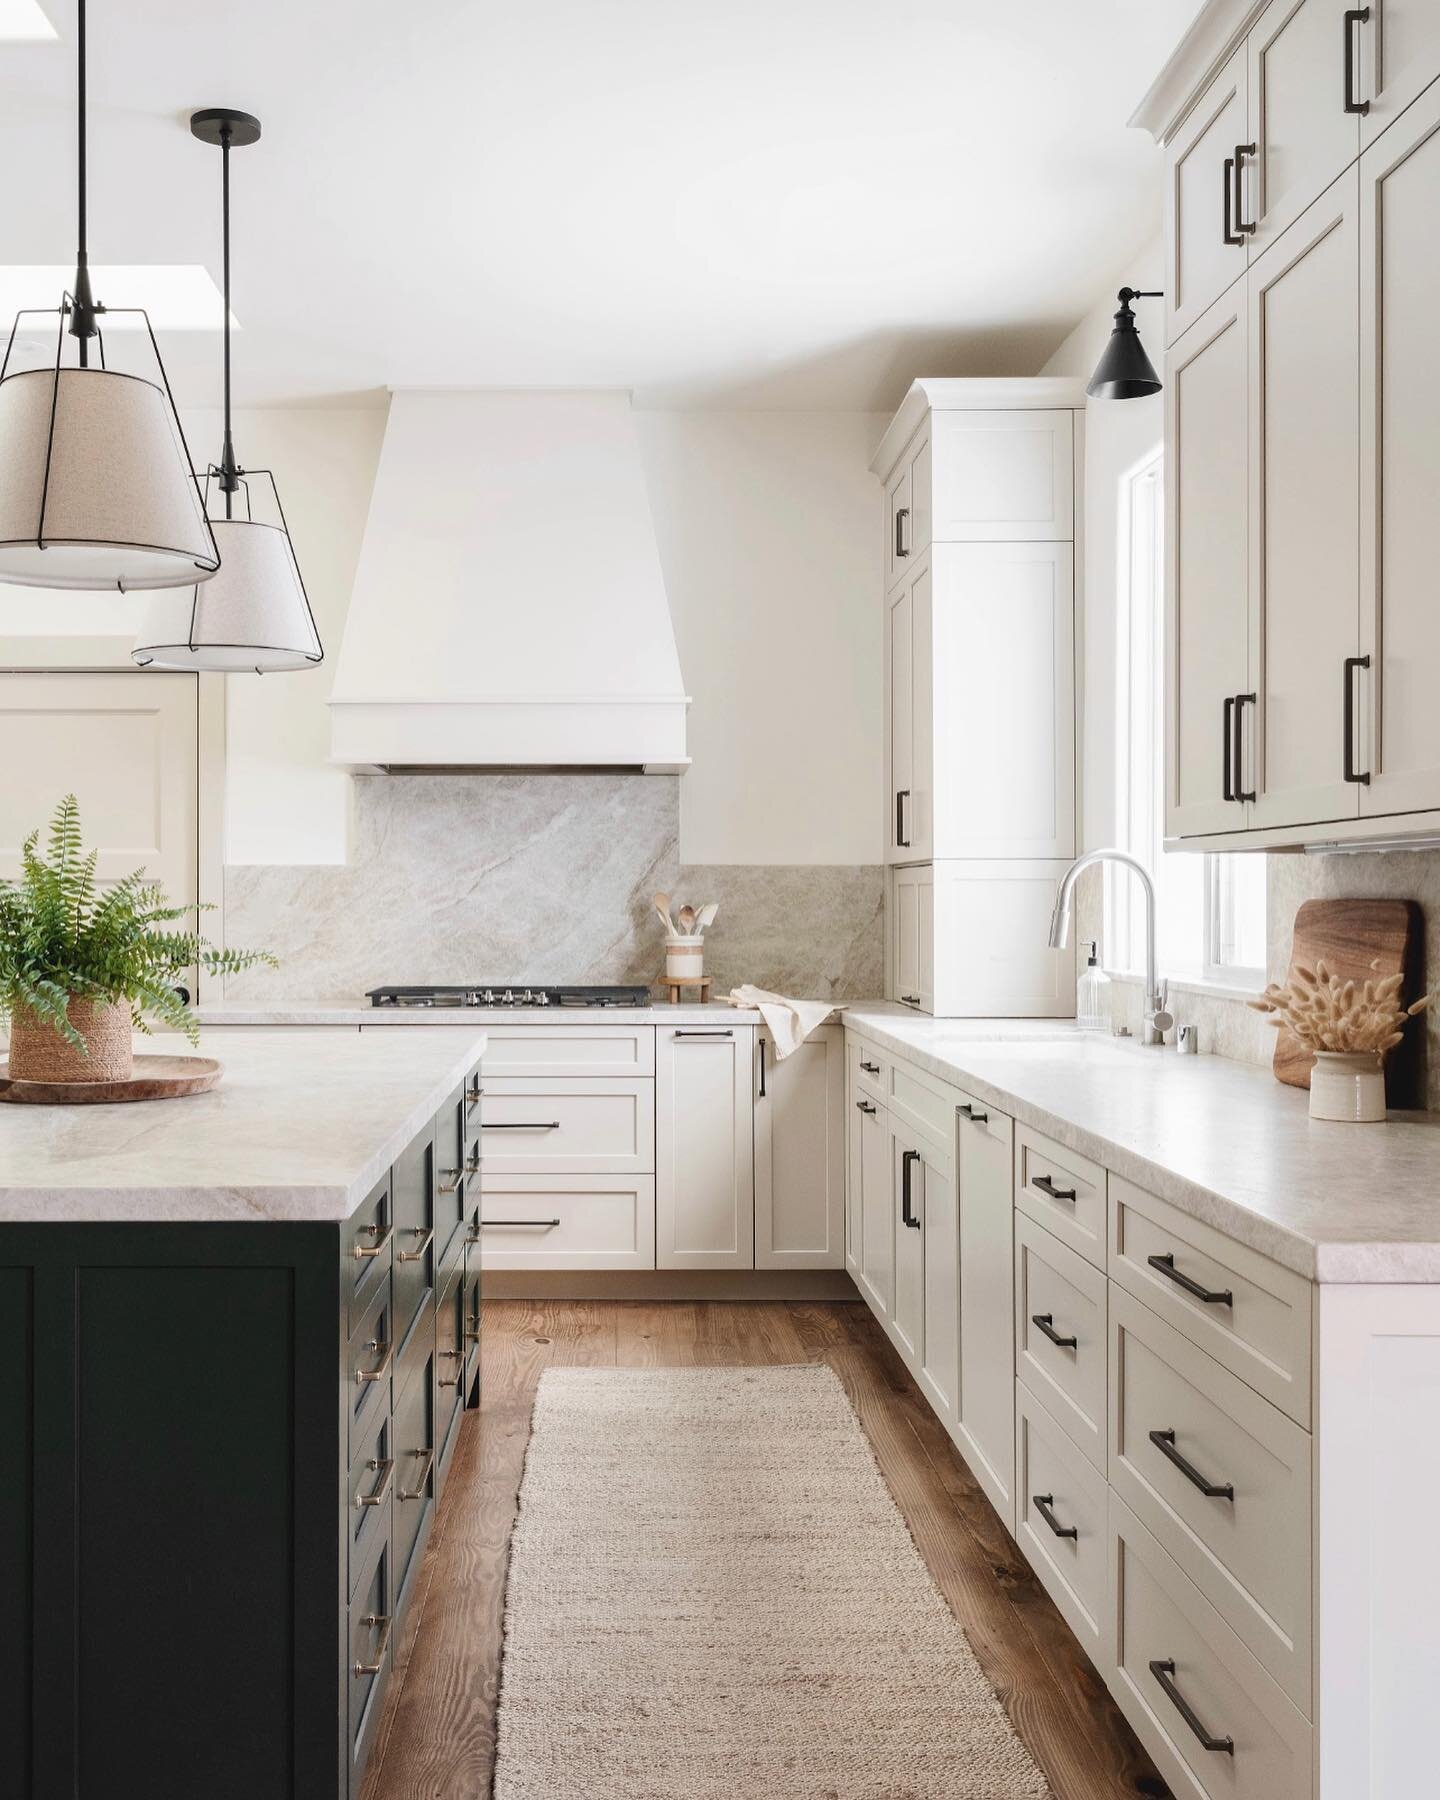 Are two-toned kitchens still a thing? We think so! In this beautiful kitchen, we opted for a soft putty color for the perimeter cabinetry and then accented with a deep green. We kept countertops the same since that color change was enough pop! Design